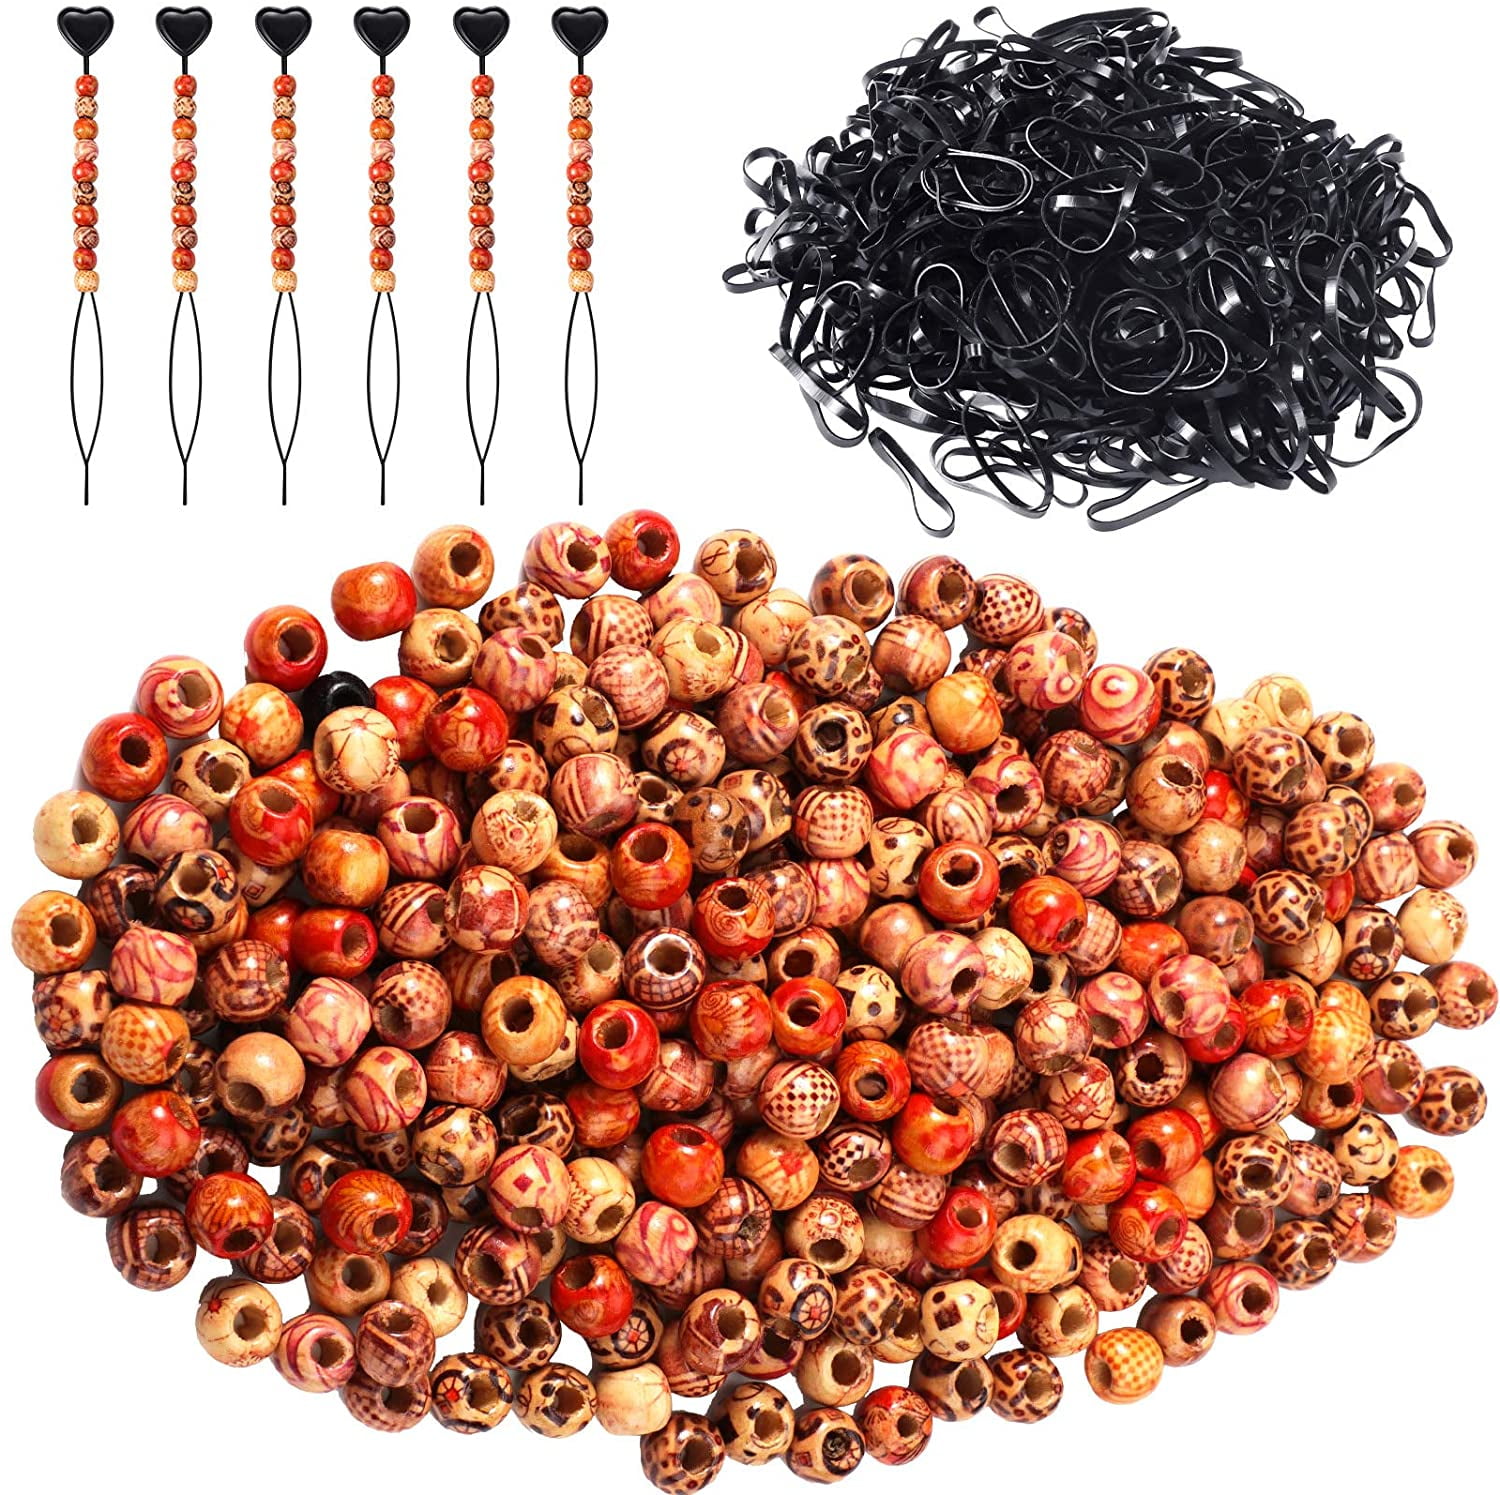 Printed Wooden Beads,400 Pieces Mixed Pattern Printed Wooden Round Ball Loose Wood for Jewelry Making Accessories 